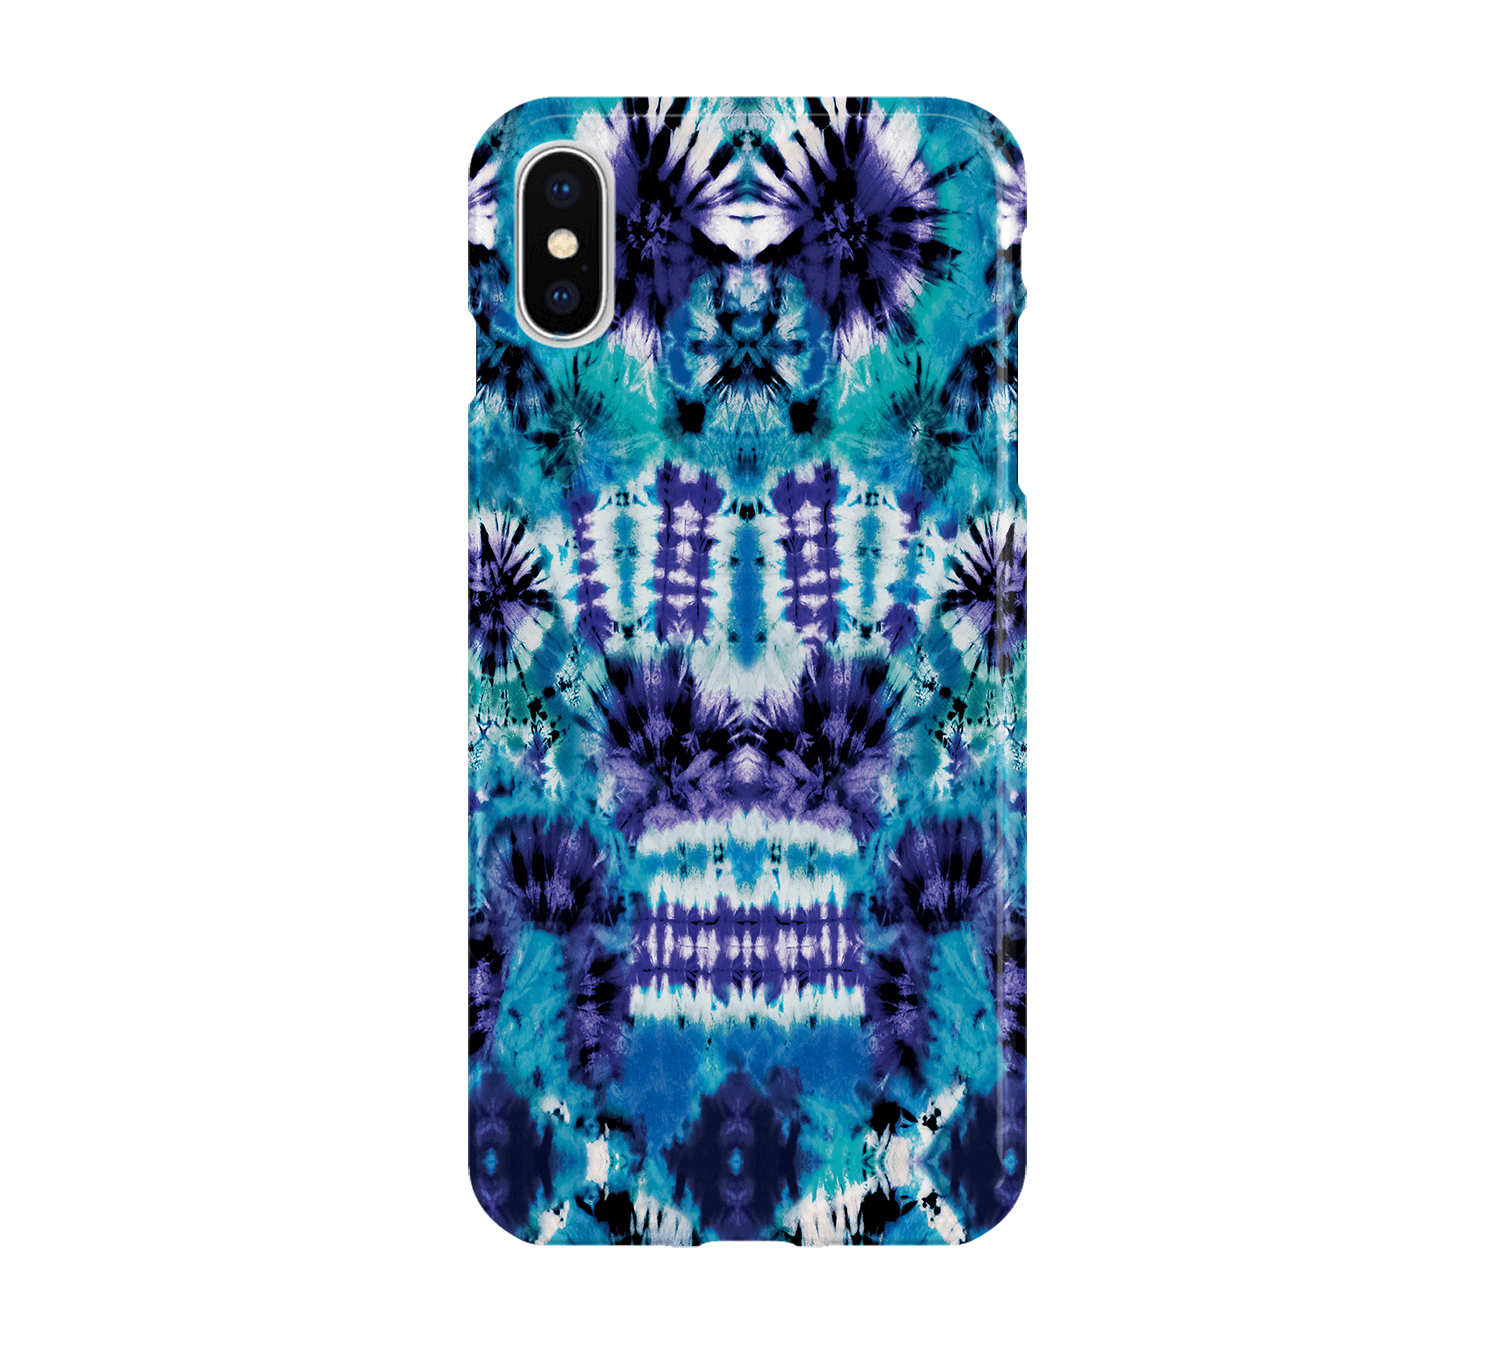 Blue Tie Dye - iPhone phone case designs by CaseSwagger